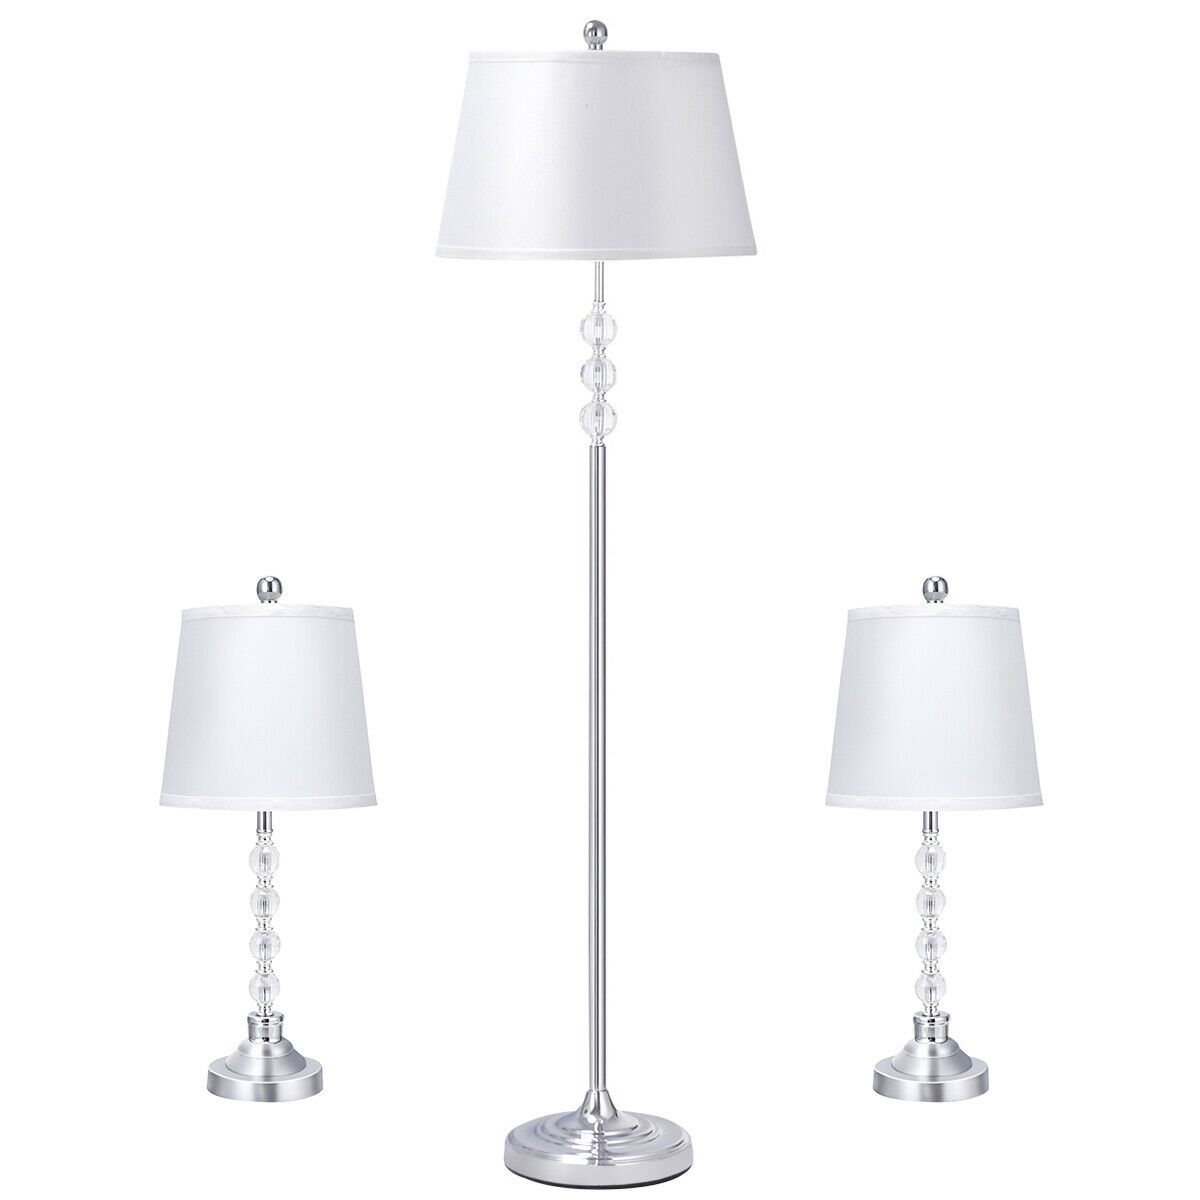 3-Piece Lamp Set 2 Table Lamps 1 Floor Lamp Chrome Finished Modern Home Bedroom